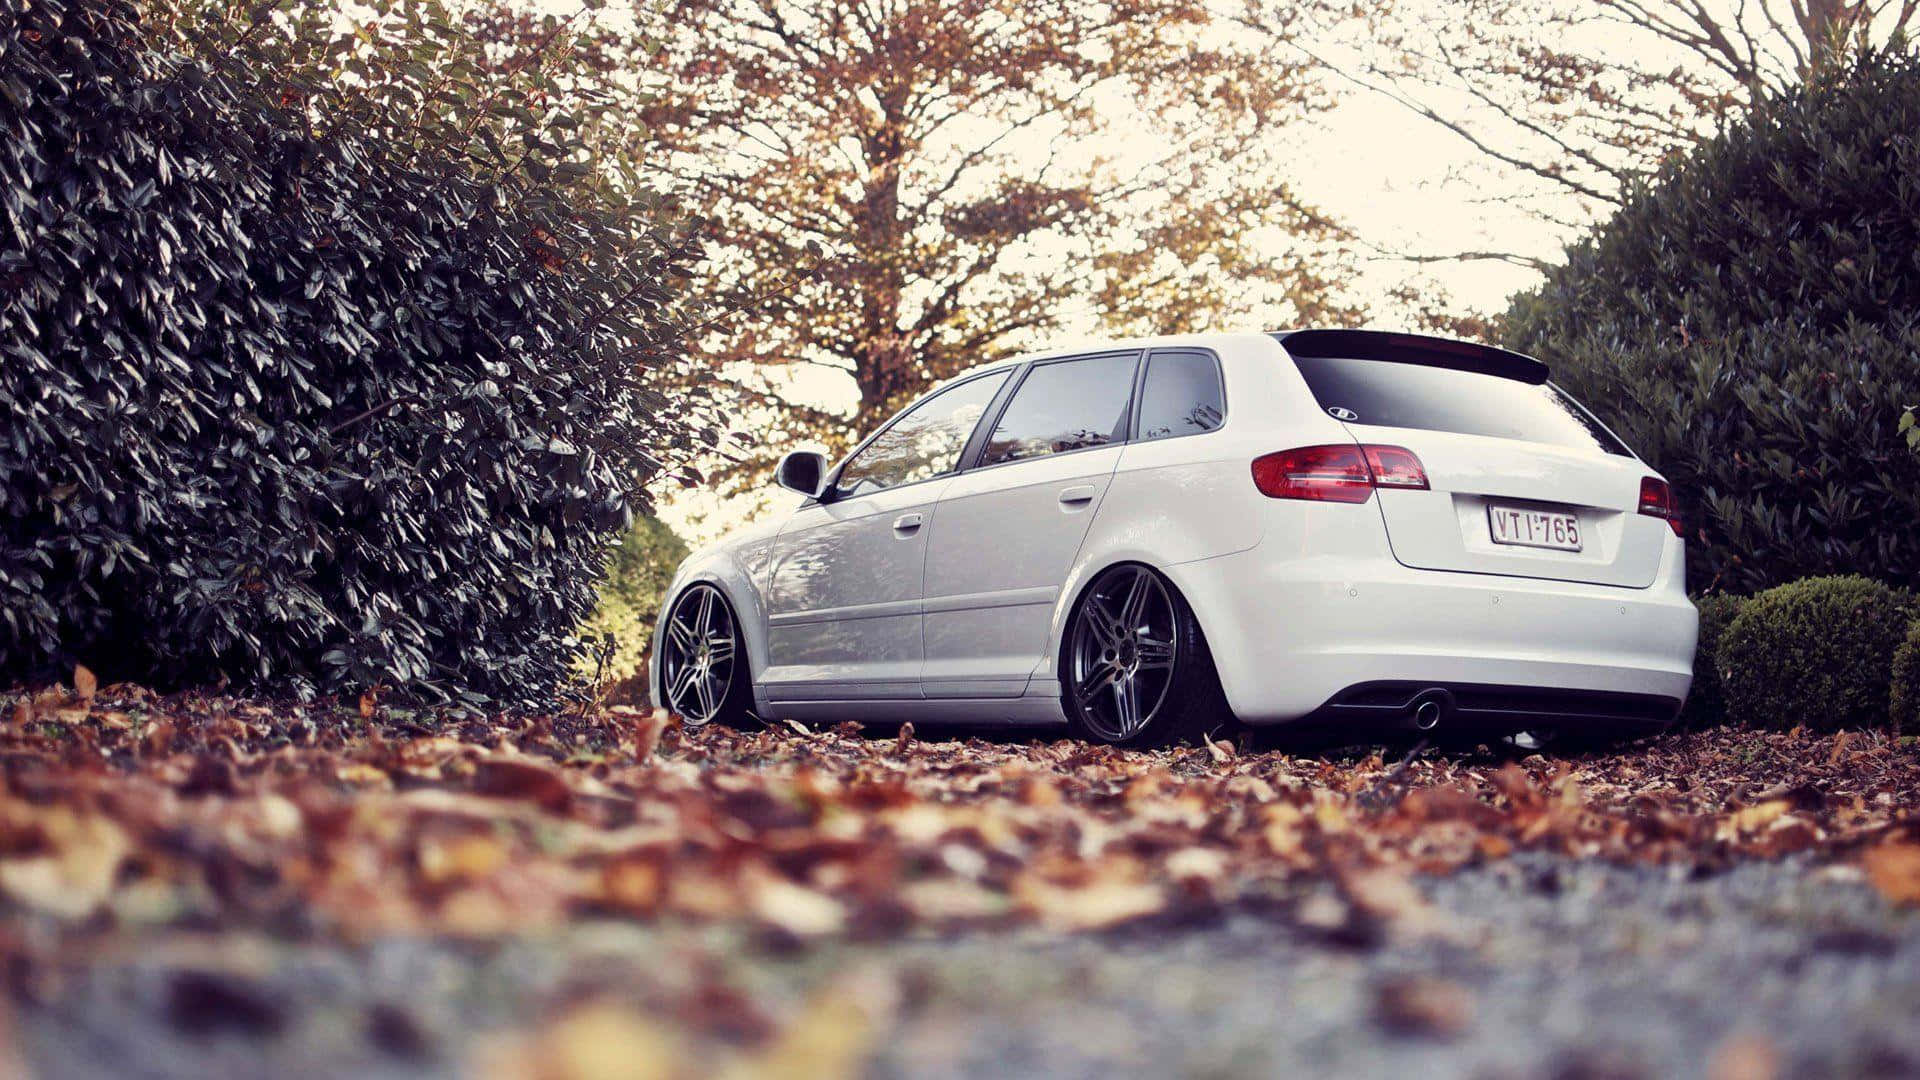 Sleek Audi A3 on Scenic Hilly Road Wallpaper